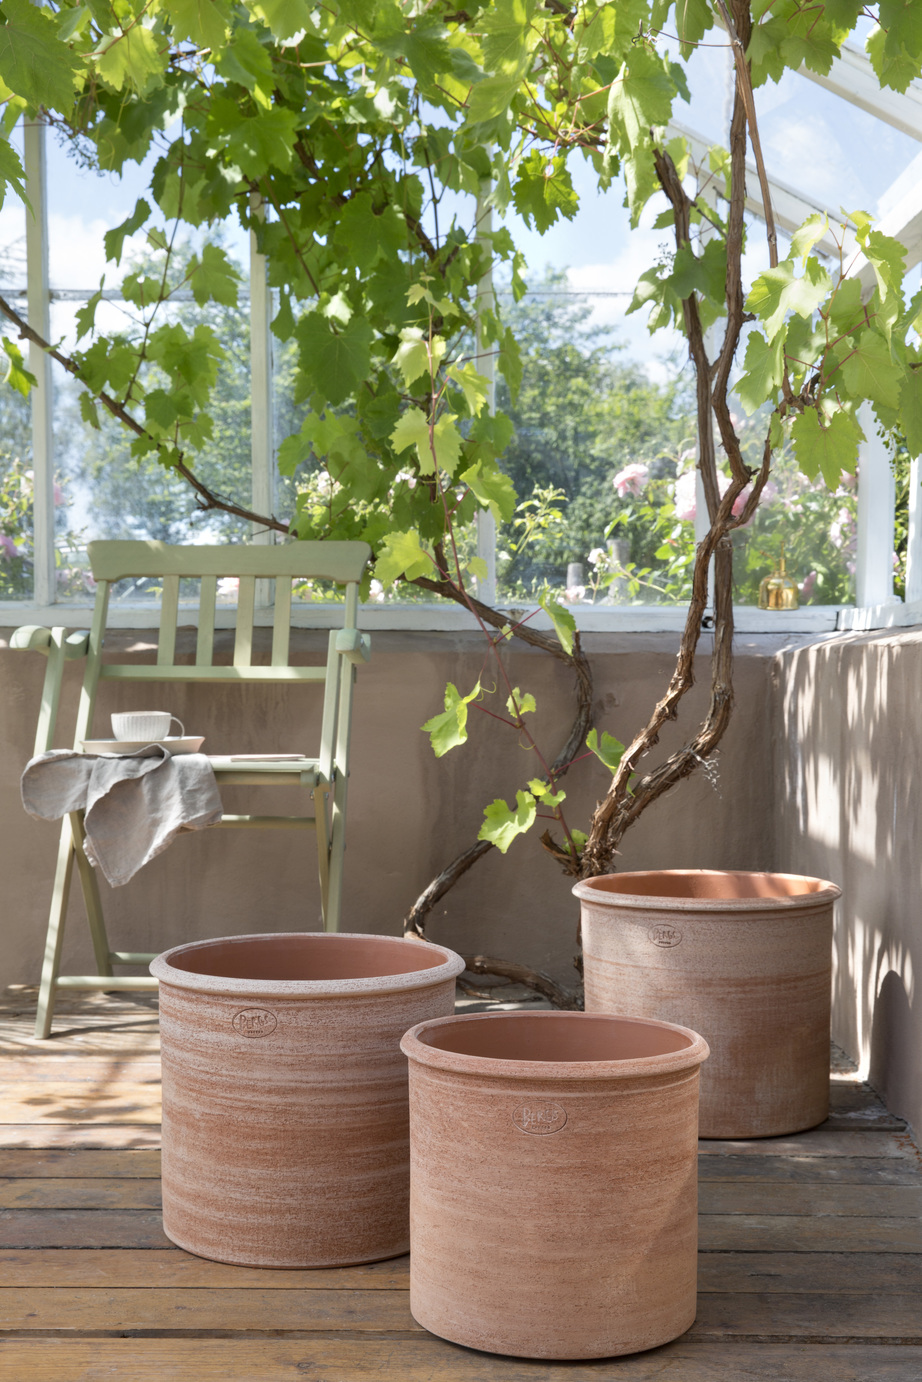 Three raw rose cylindrical outdoor pots.